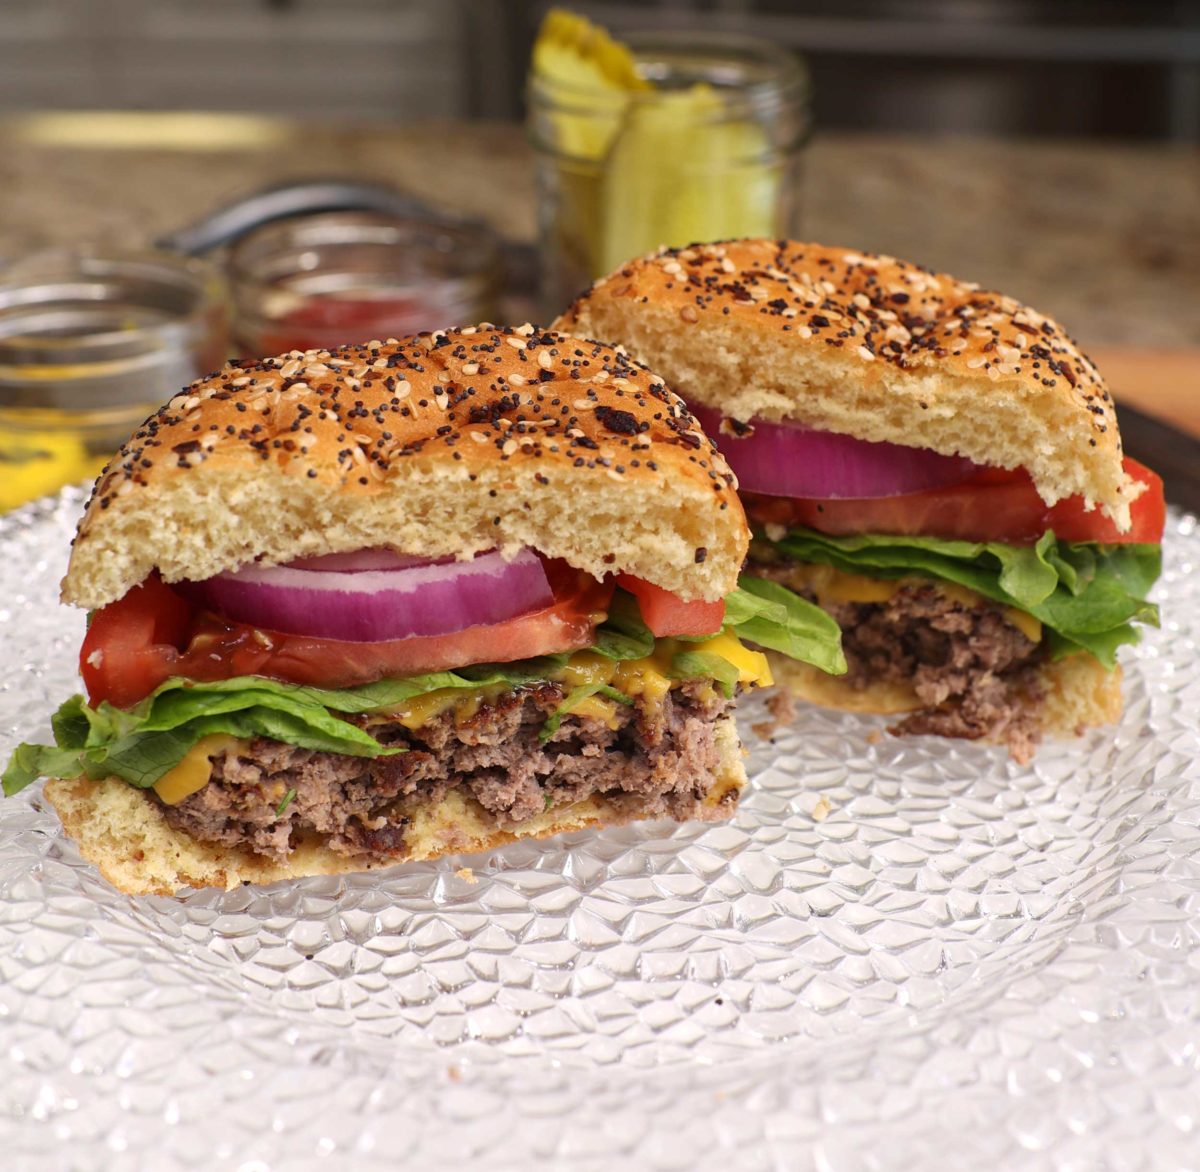 a hamburger topped with cheese, lettuce, tomato, onions and ketchup next to a jar of pickles.